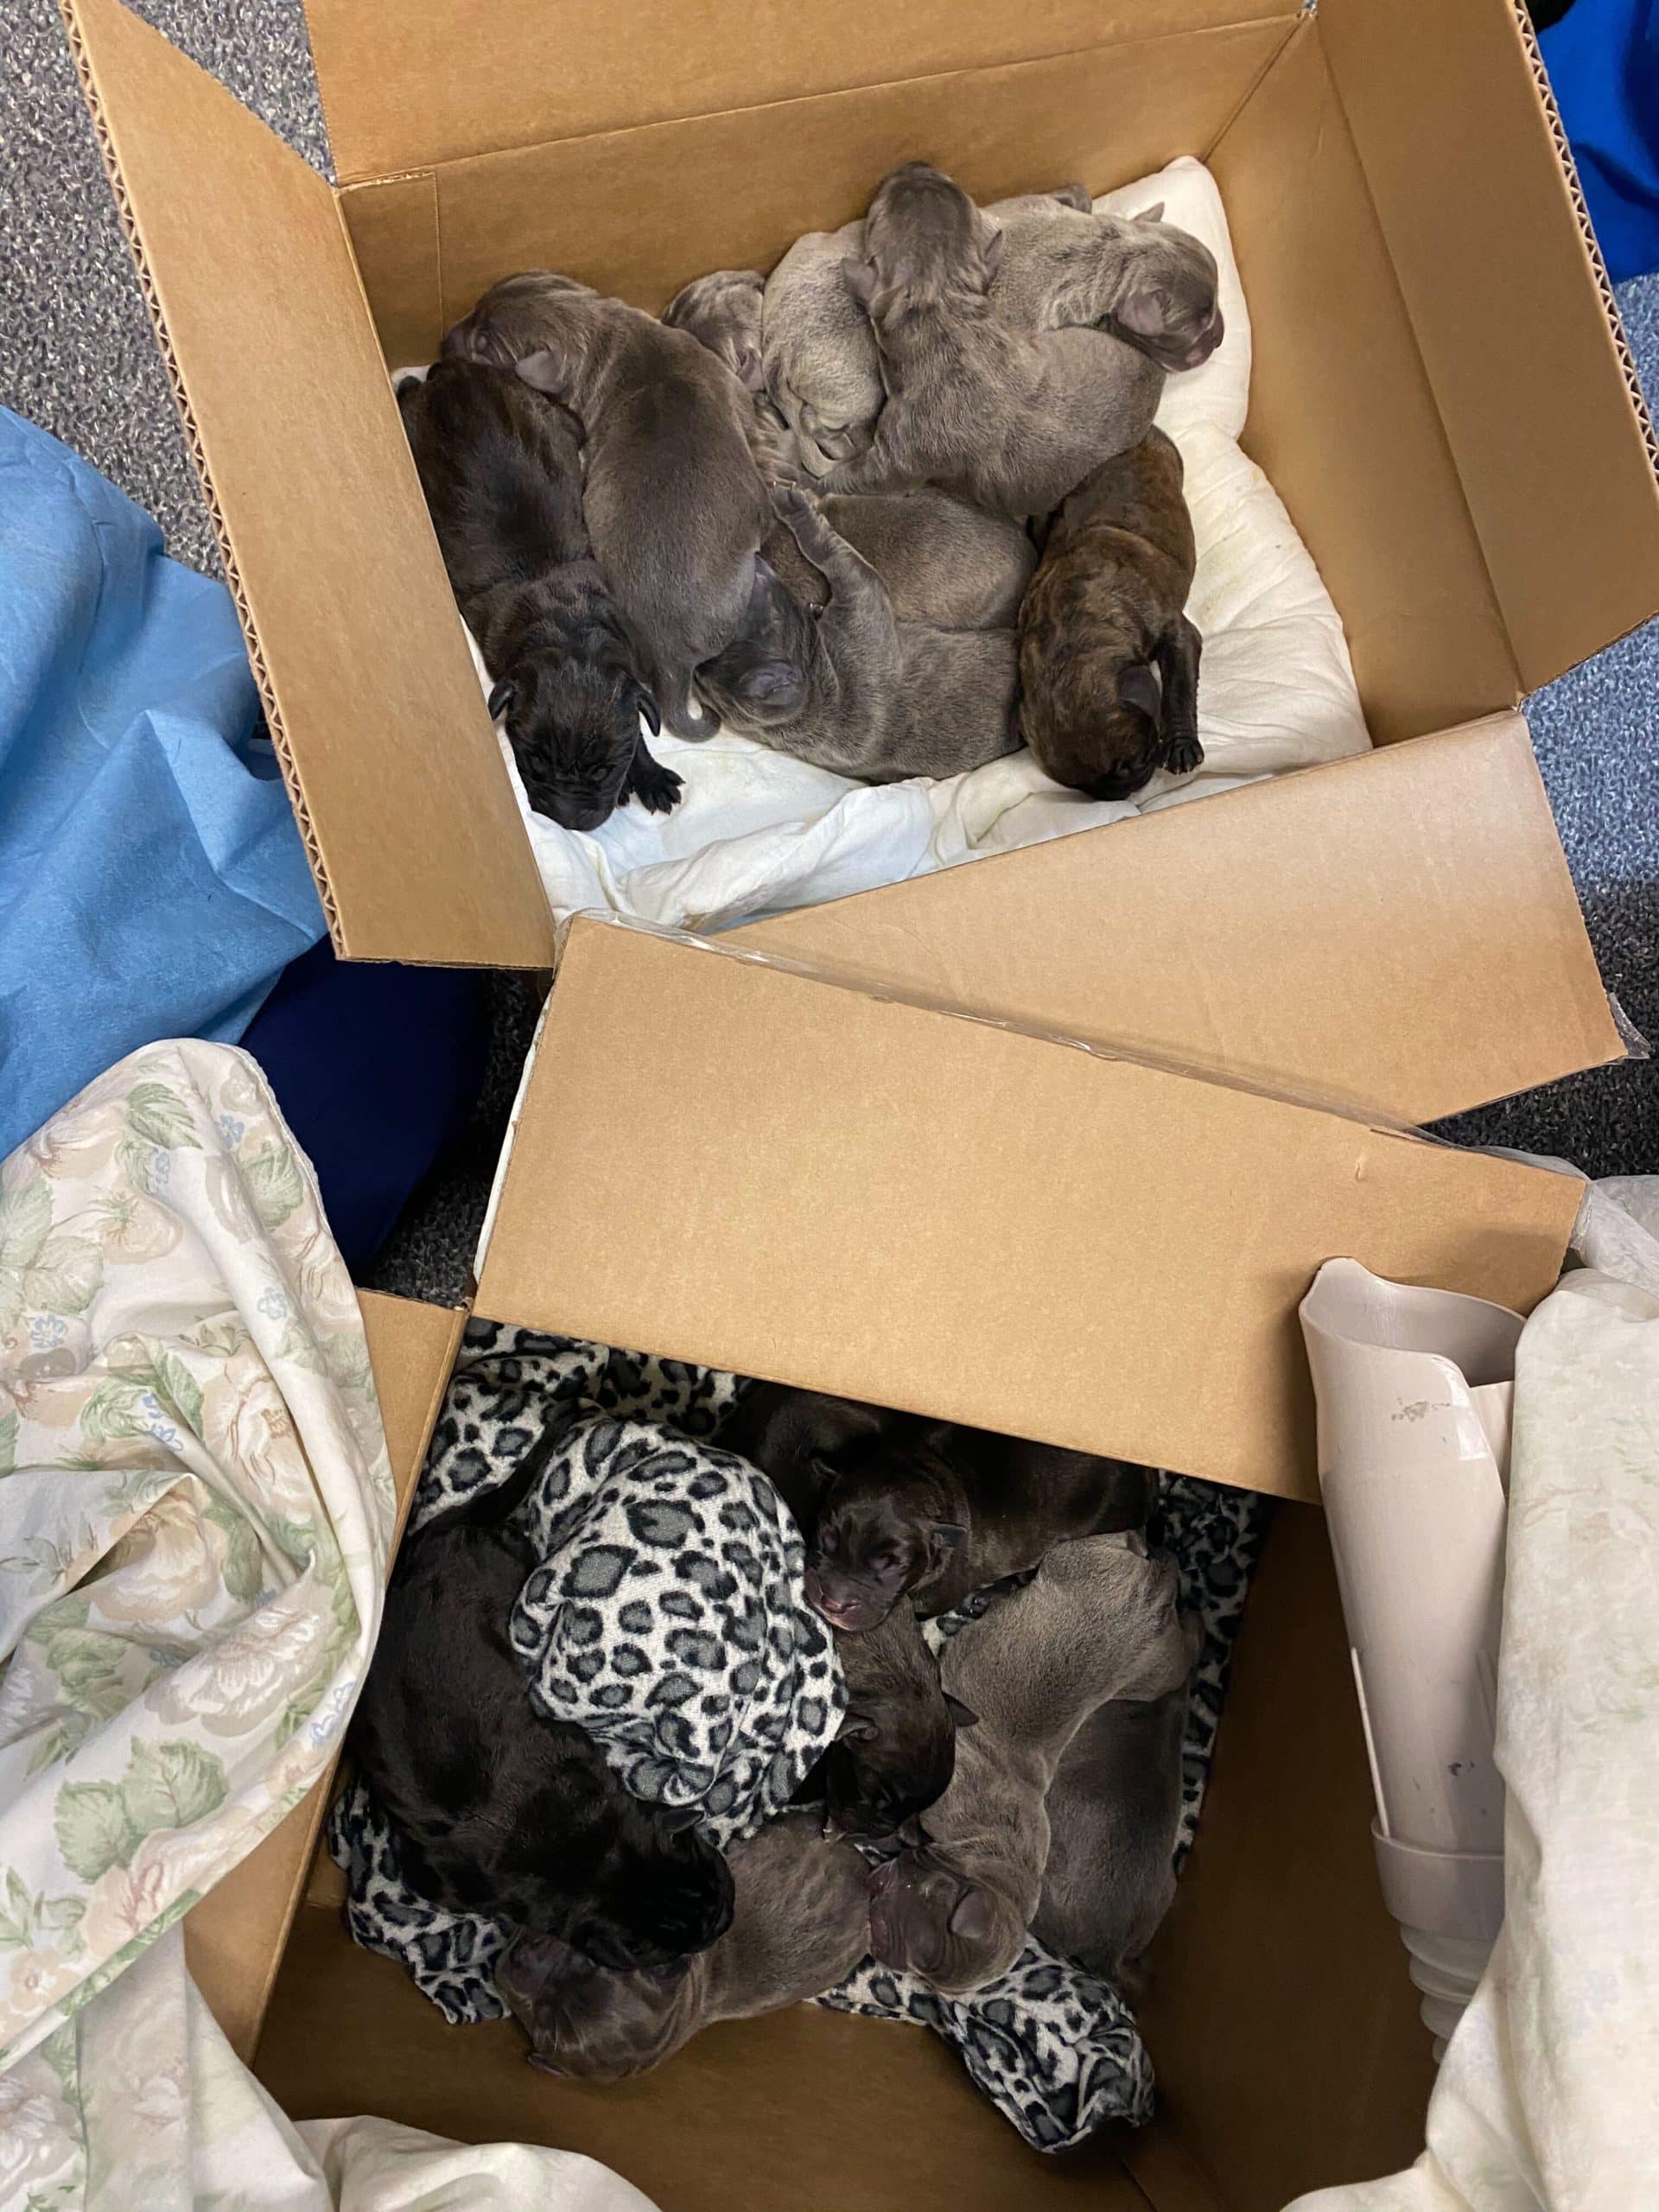 Record breaking litter of puppies in make-shift beds at Underwood